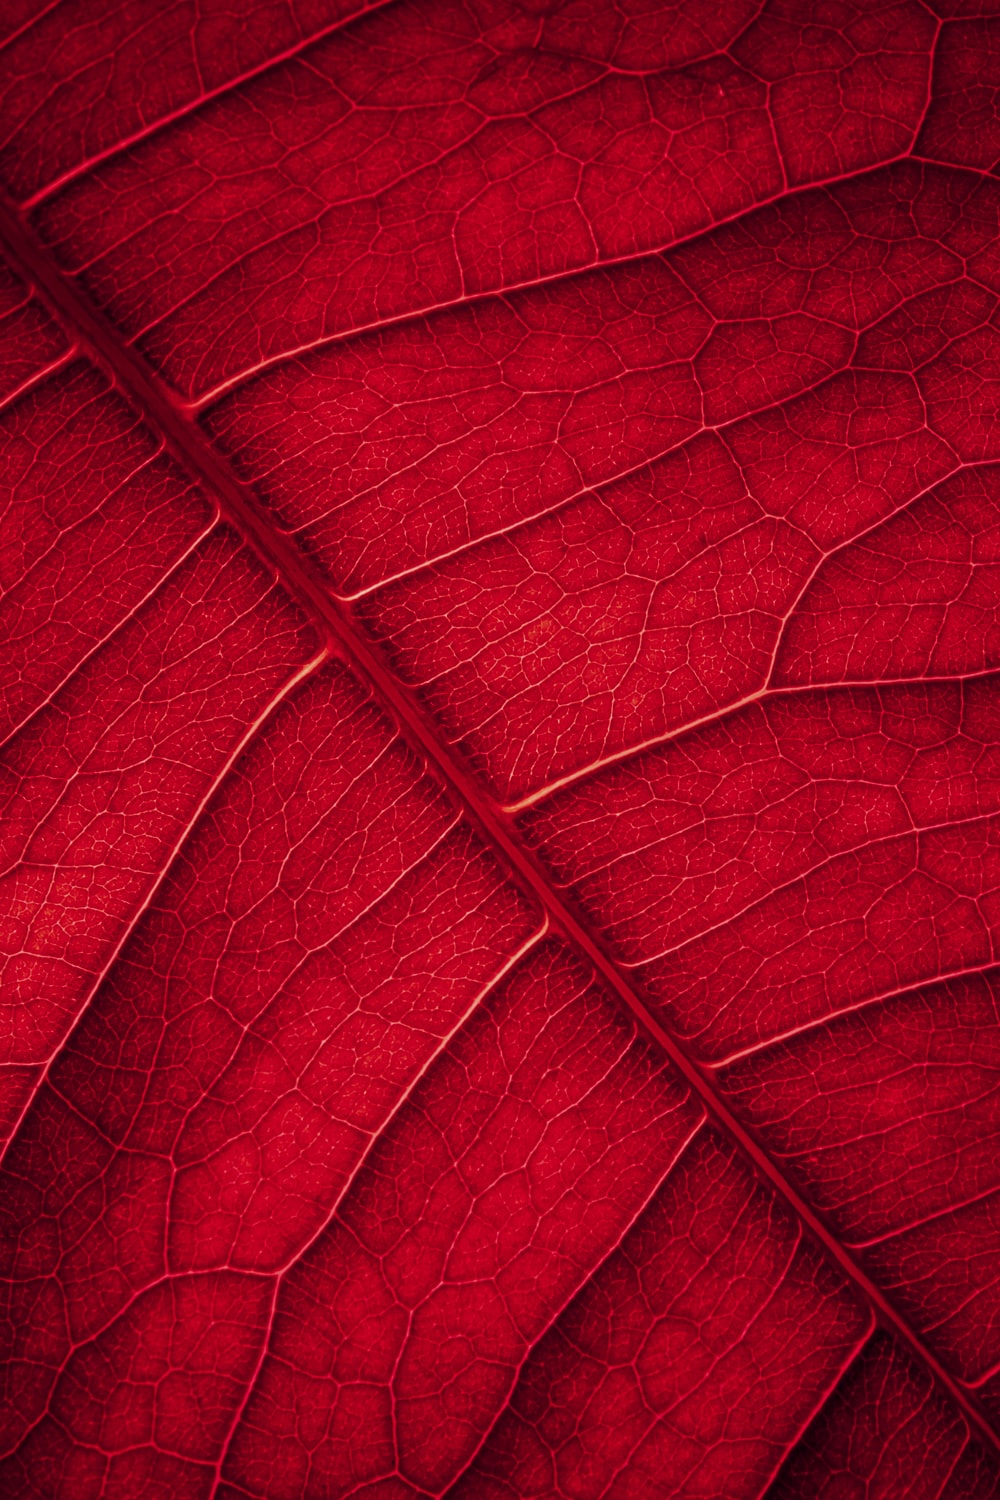 red leaf in close up photography photo